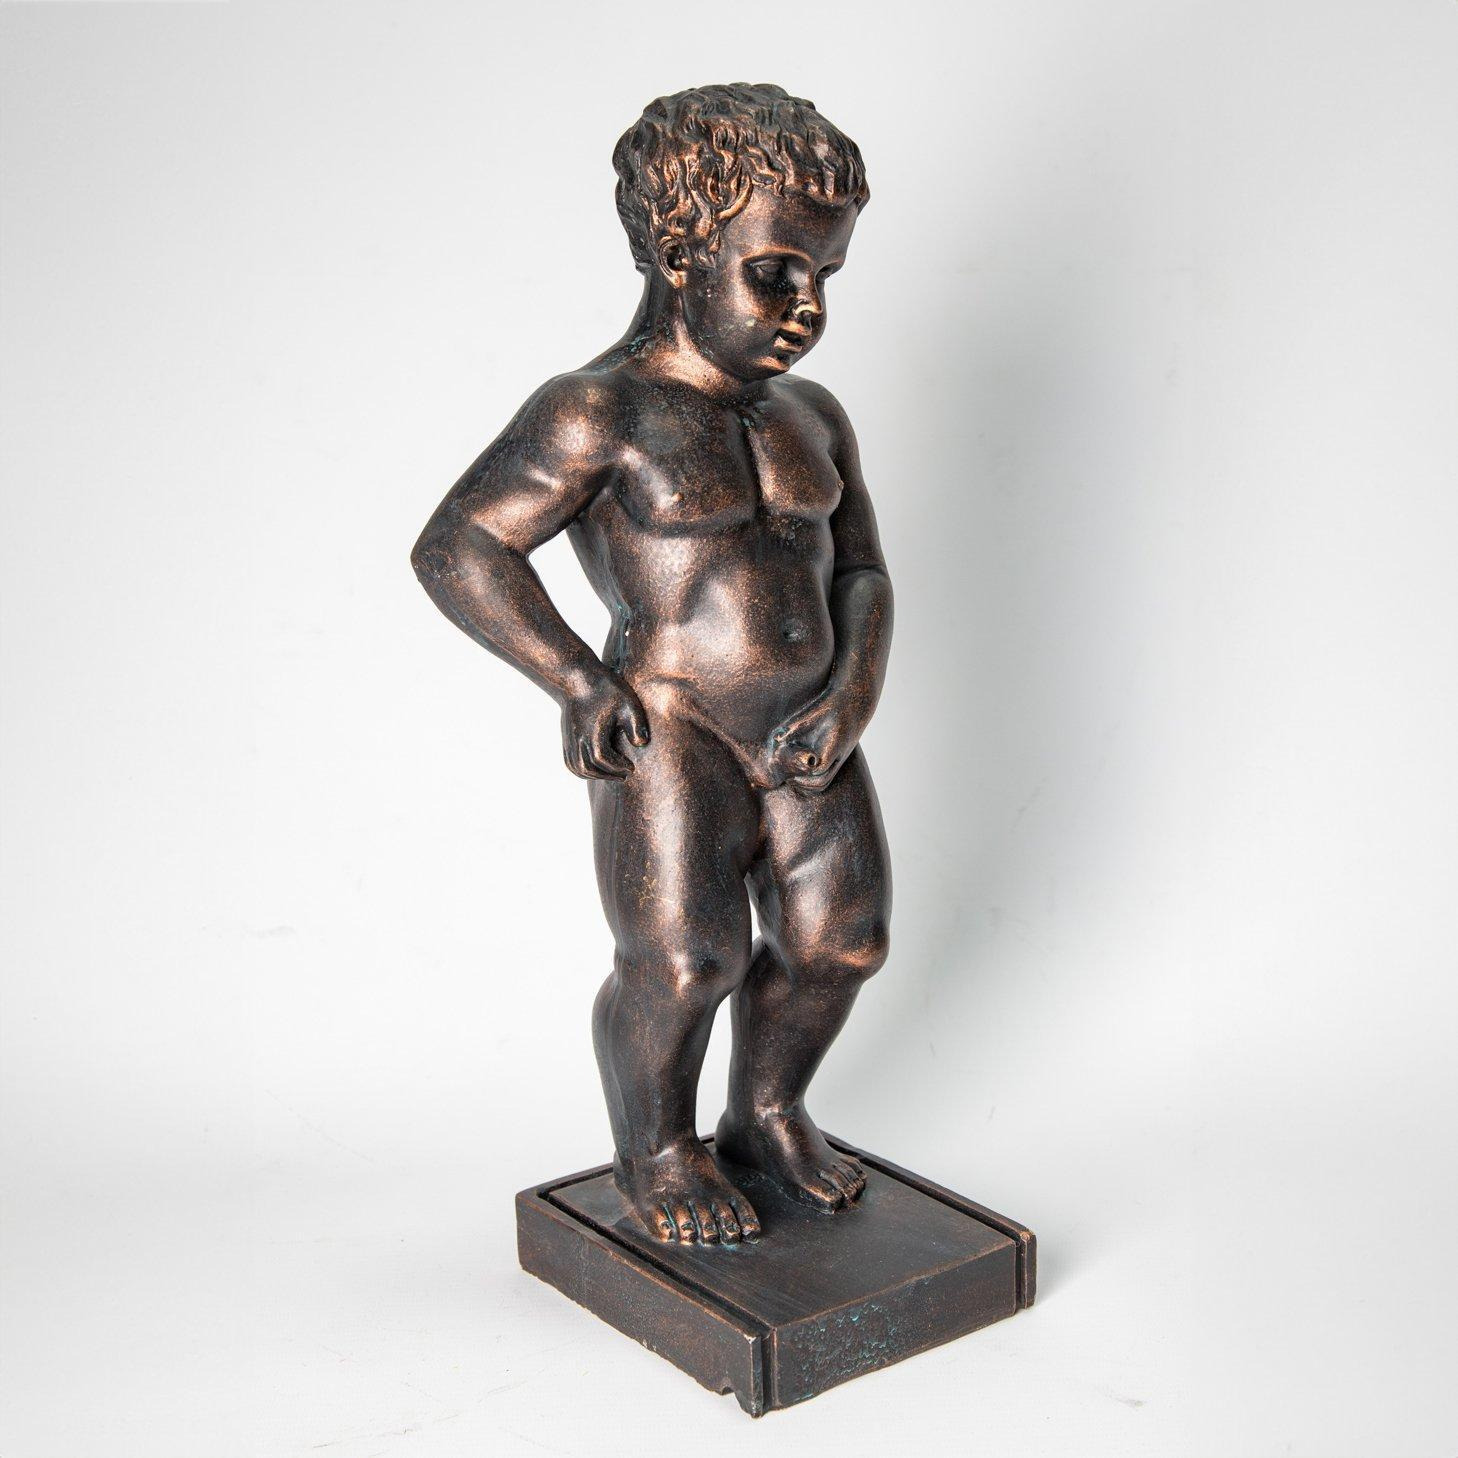 Brussels Boy Pond Spitter Fountain Feature Figurine Statue 40cm - image 1